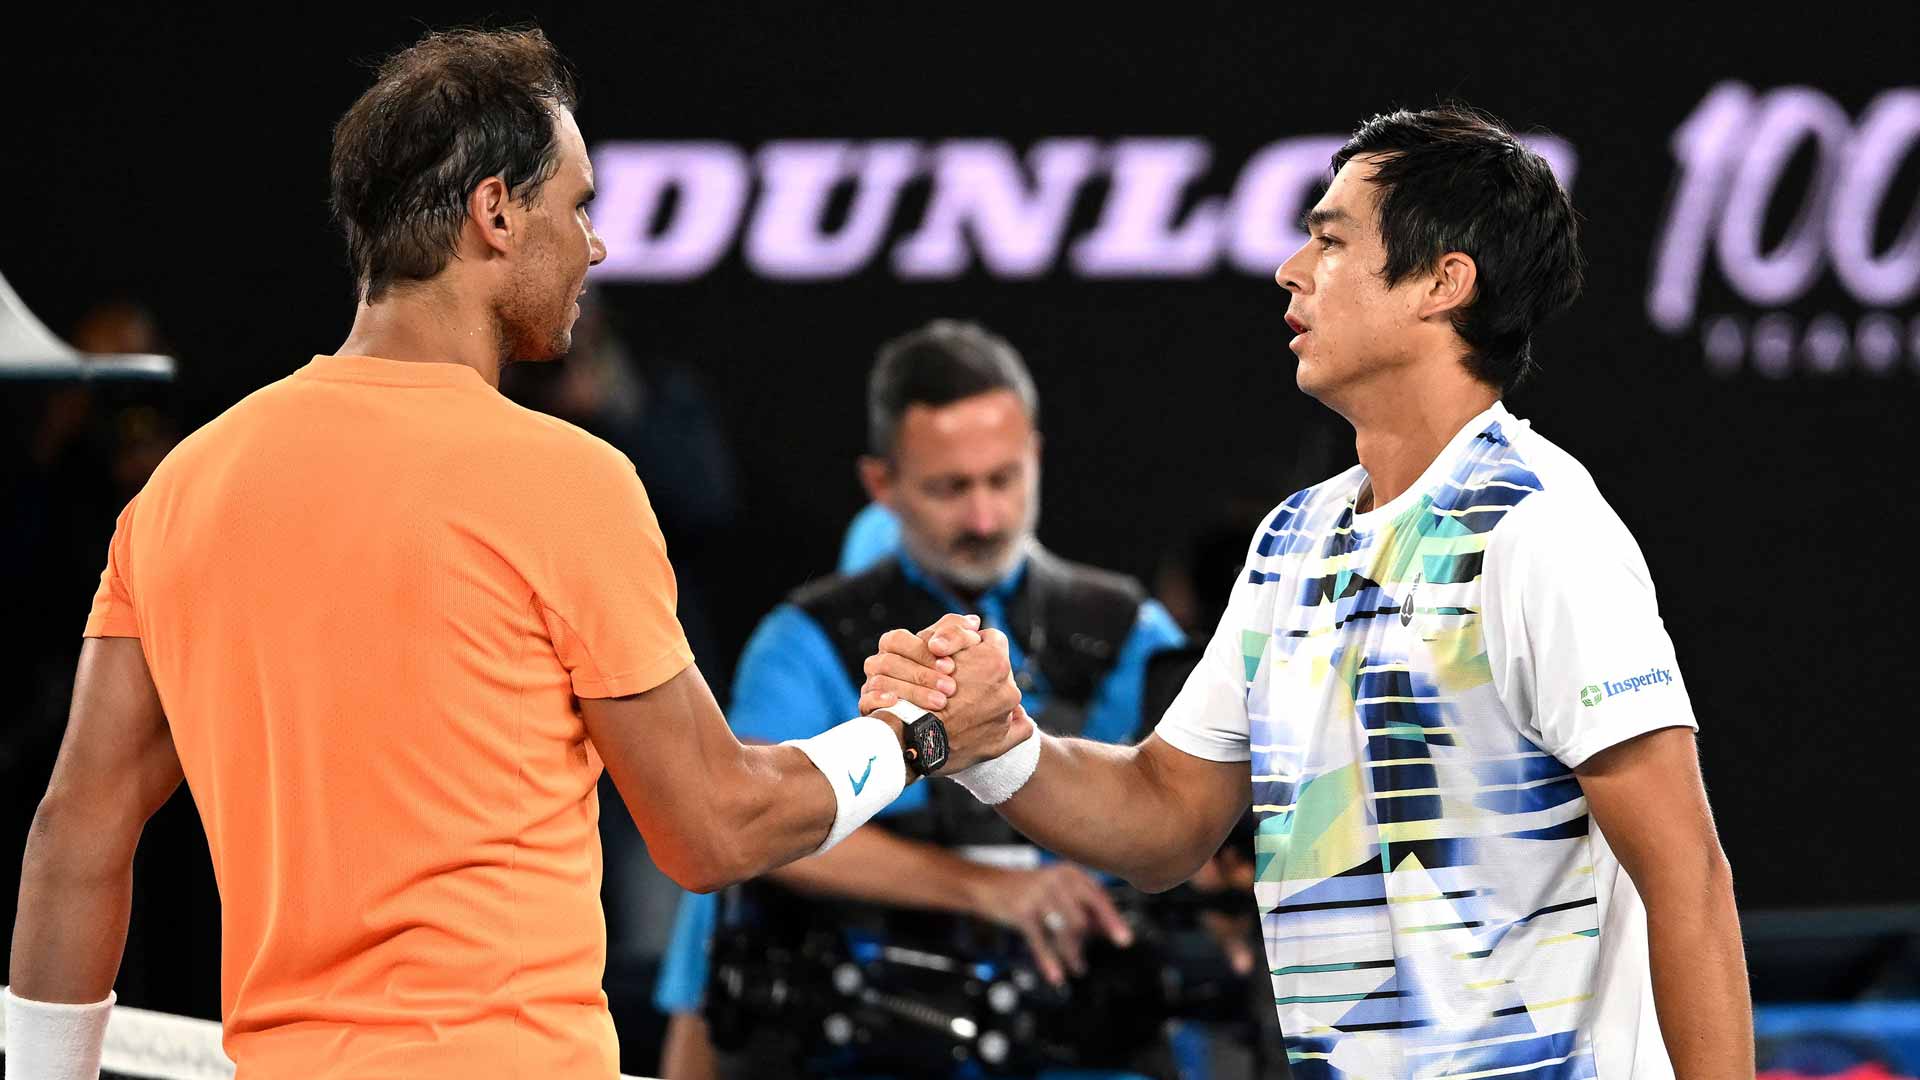 Rafael Nadal and Mackenzie McDonald shake hands after the American wins their second-round match at the Australian Open.